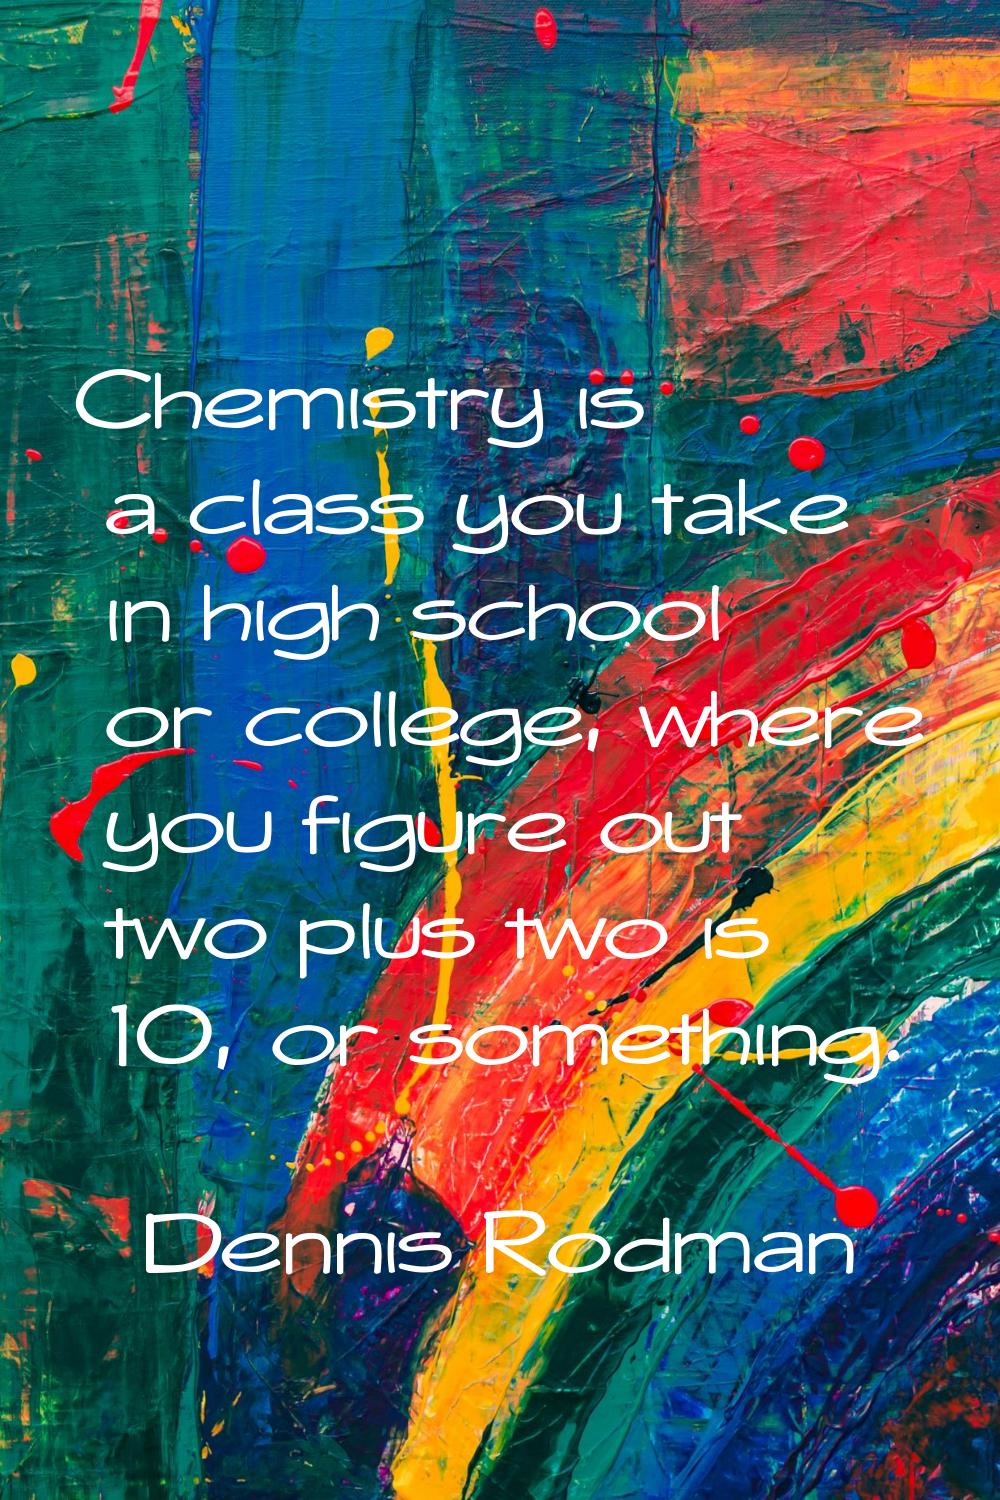 Chemistry is a class you take in high school or college, where you figure out two plus two is 10, o